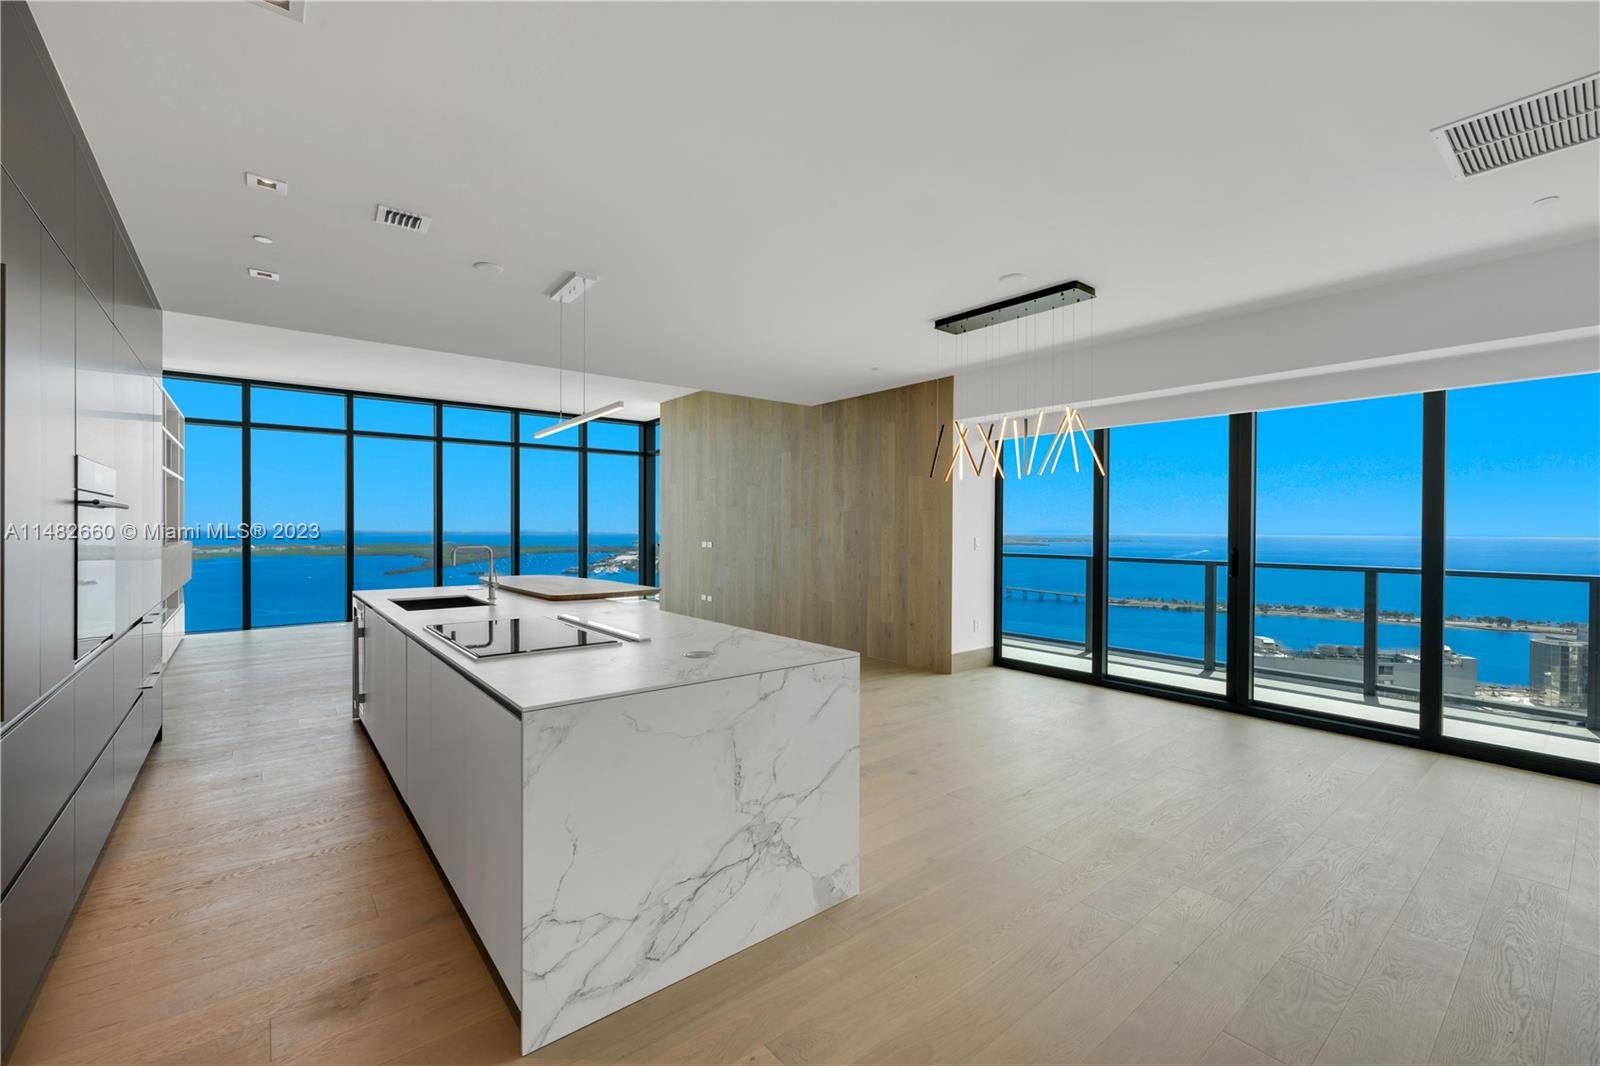 This is hands down the most stunning apartment on Brickell.